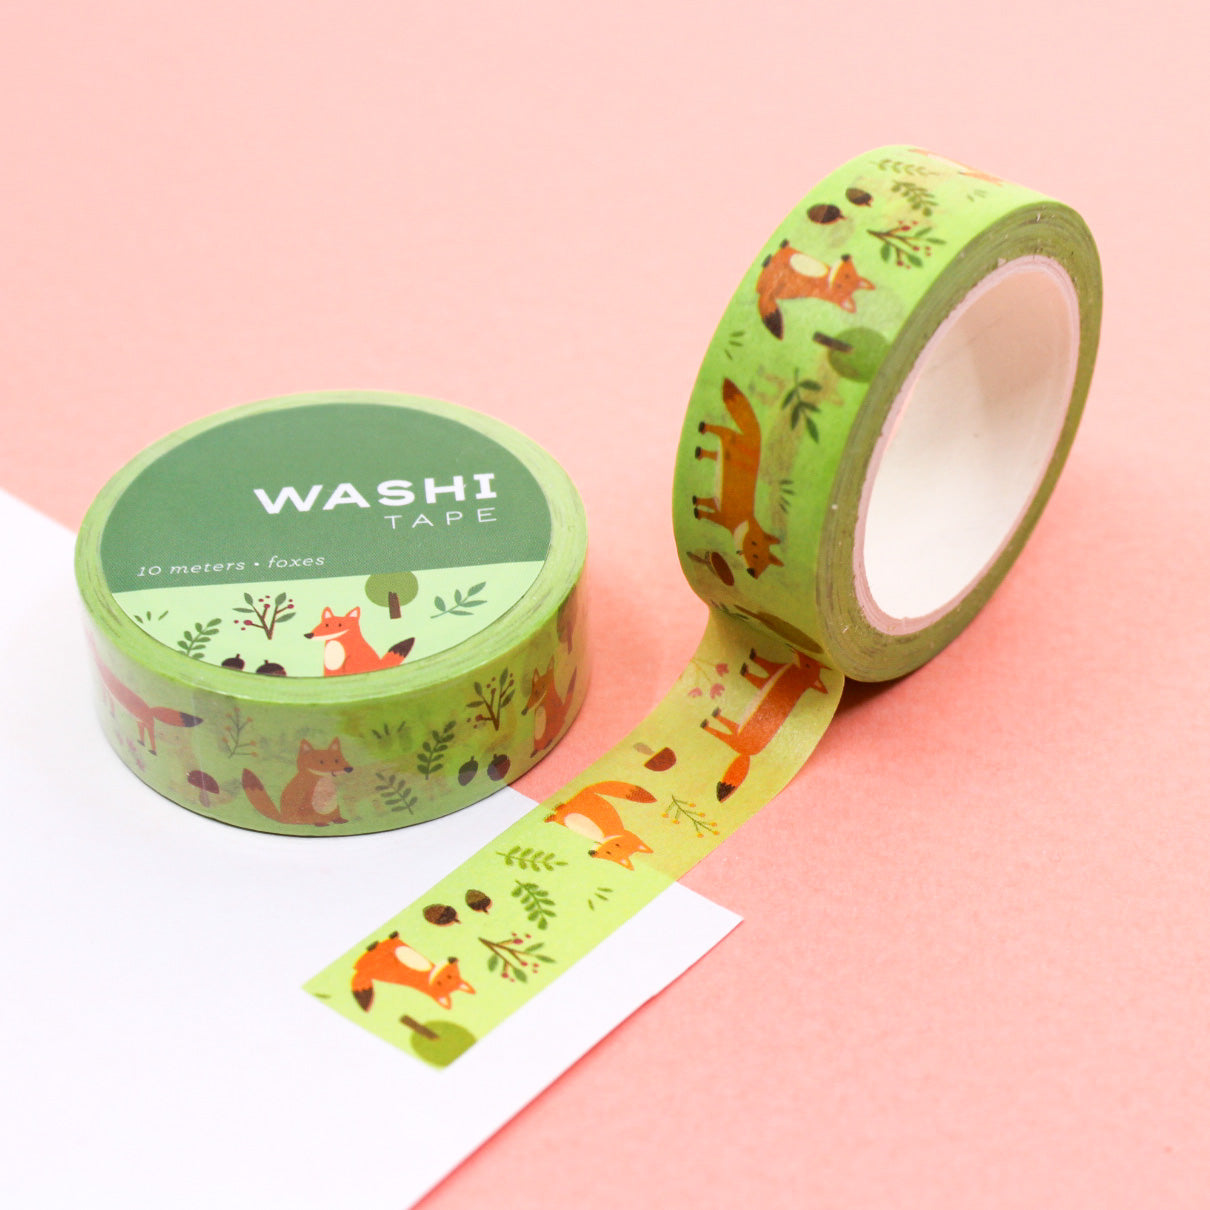  Whimsical Foxes Washi Tape showcases charming fox illustrations, perfect for adding a playful and nature-inspired touch to your crafts, scrapbooking, and more. This tape is from Girl of All Work and sold at BBB Supplies Craft Shop.